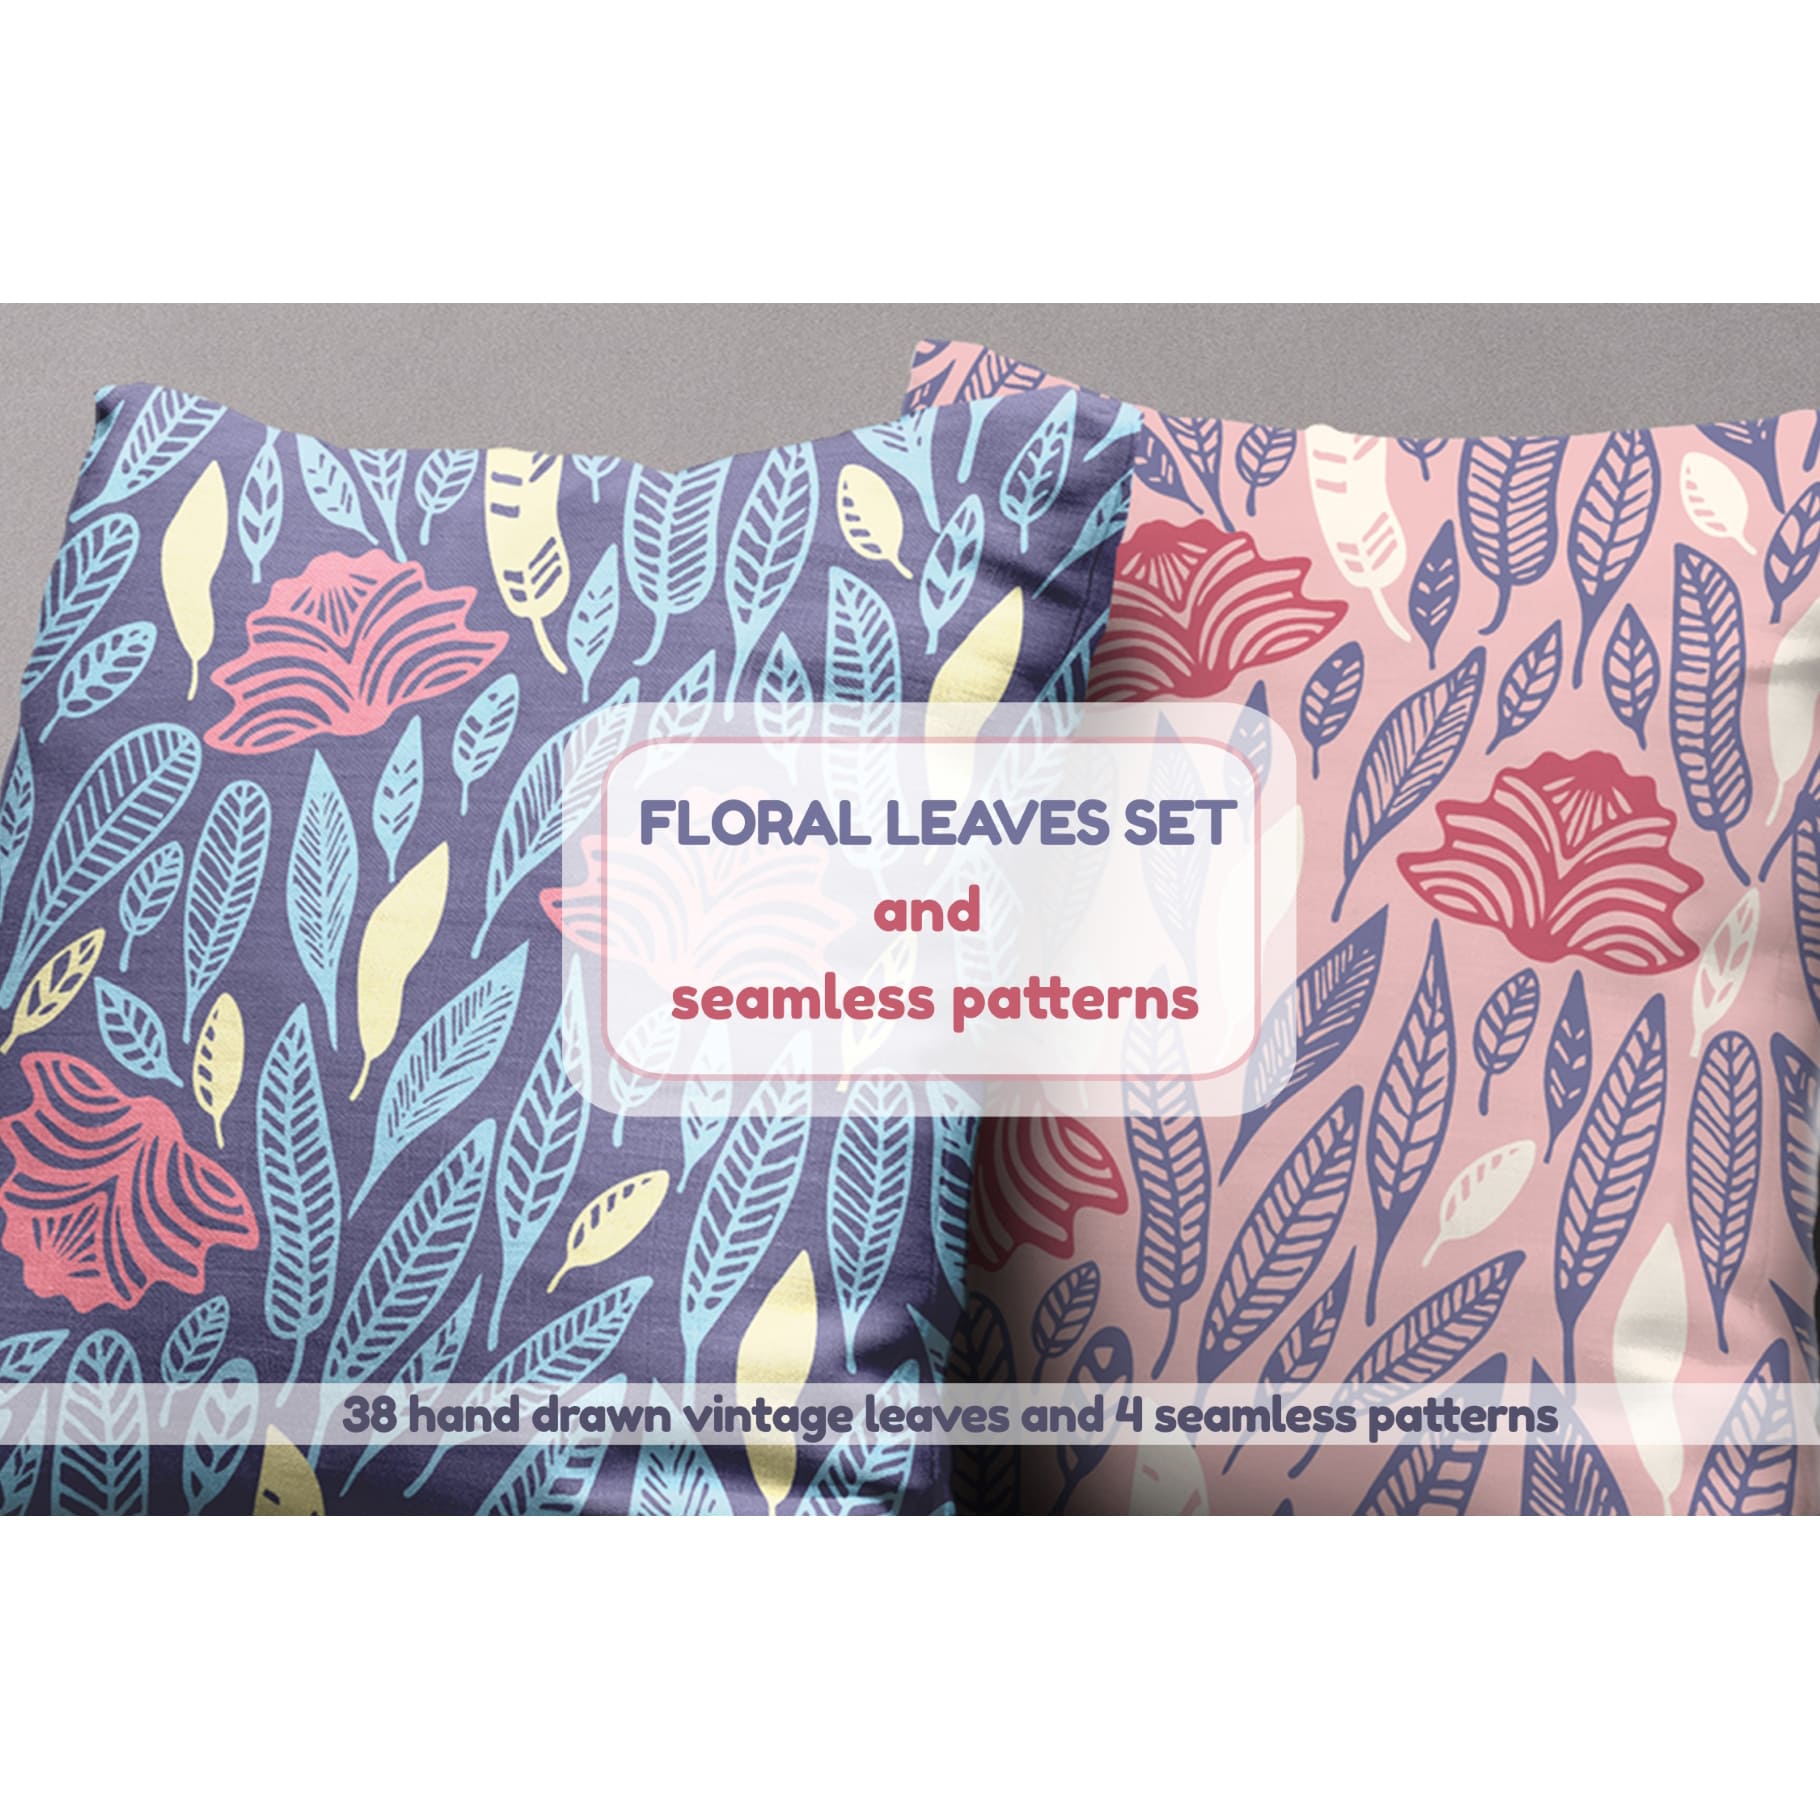 Floral Leaves Set & Seamless Patterns pillows.